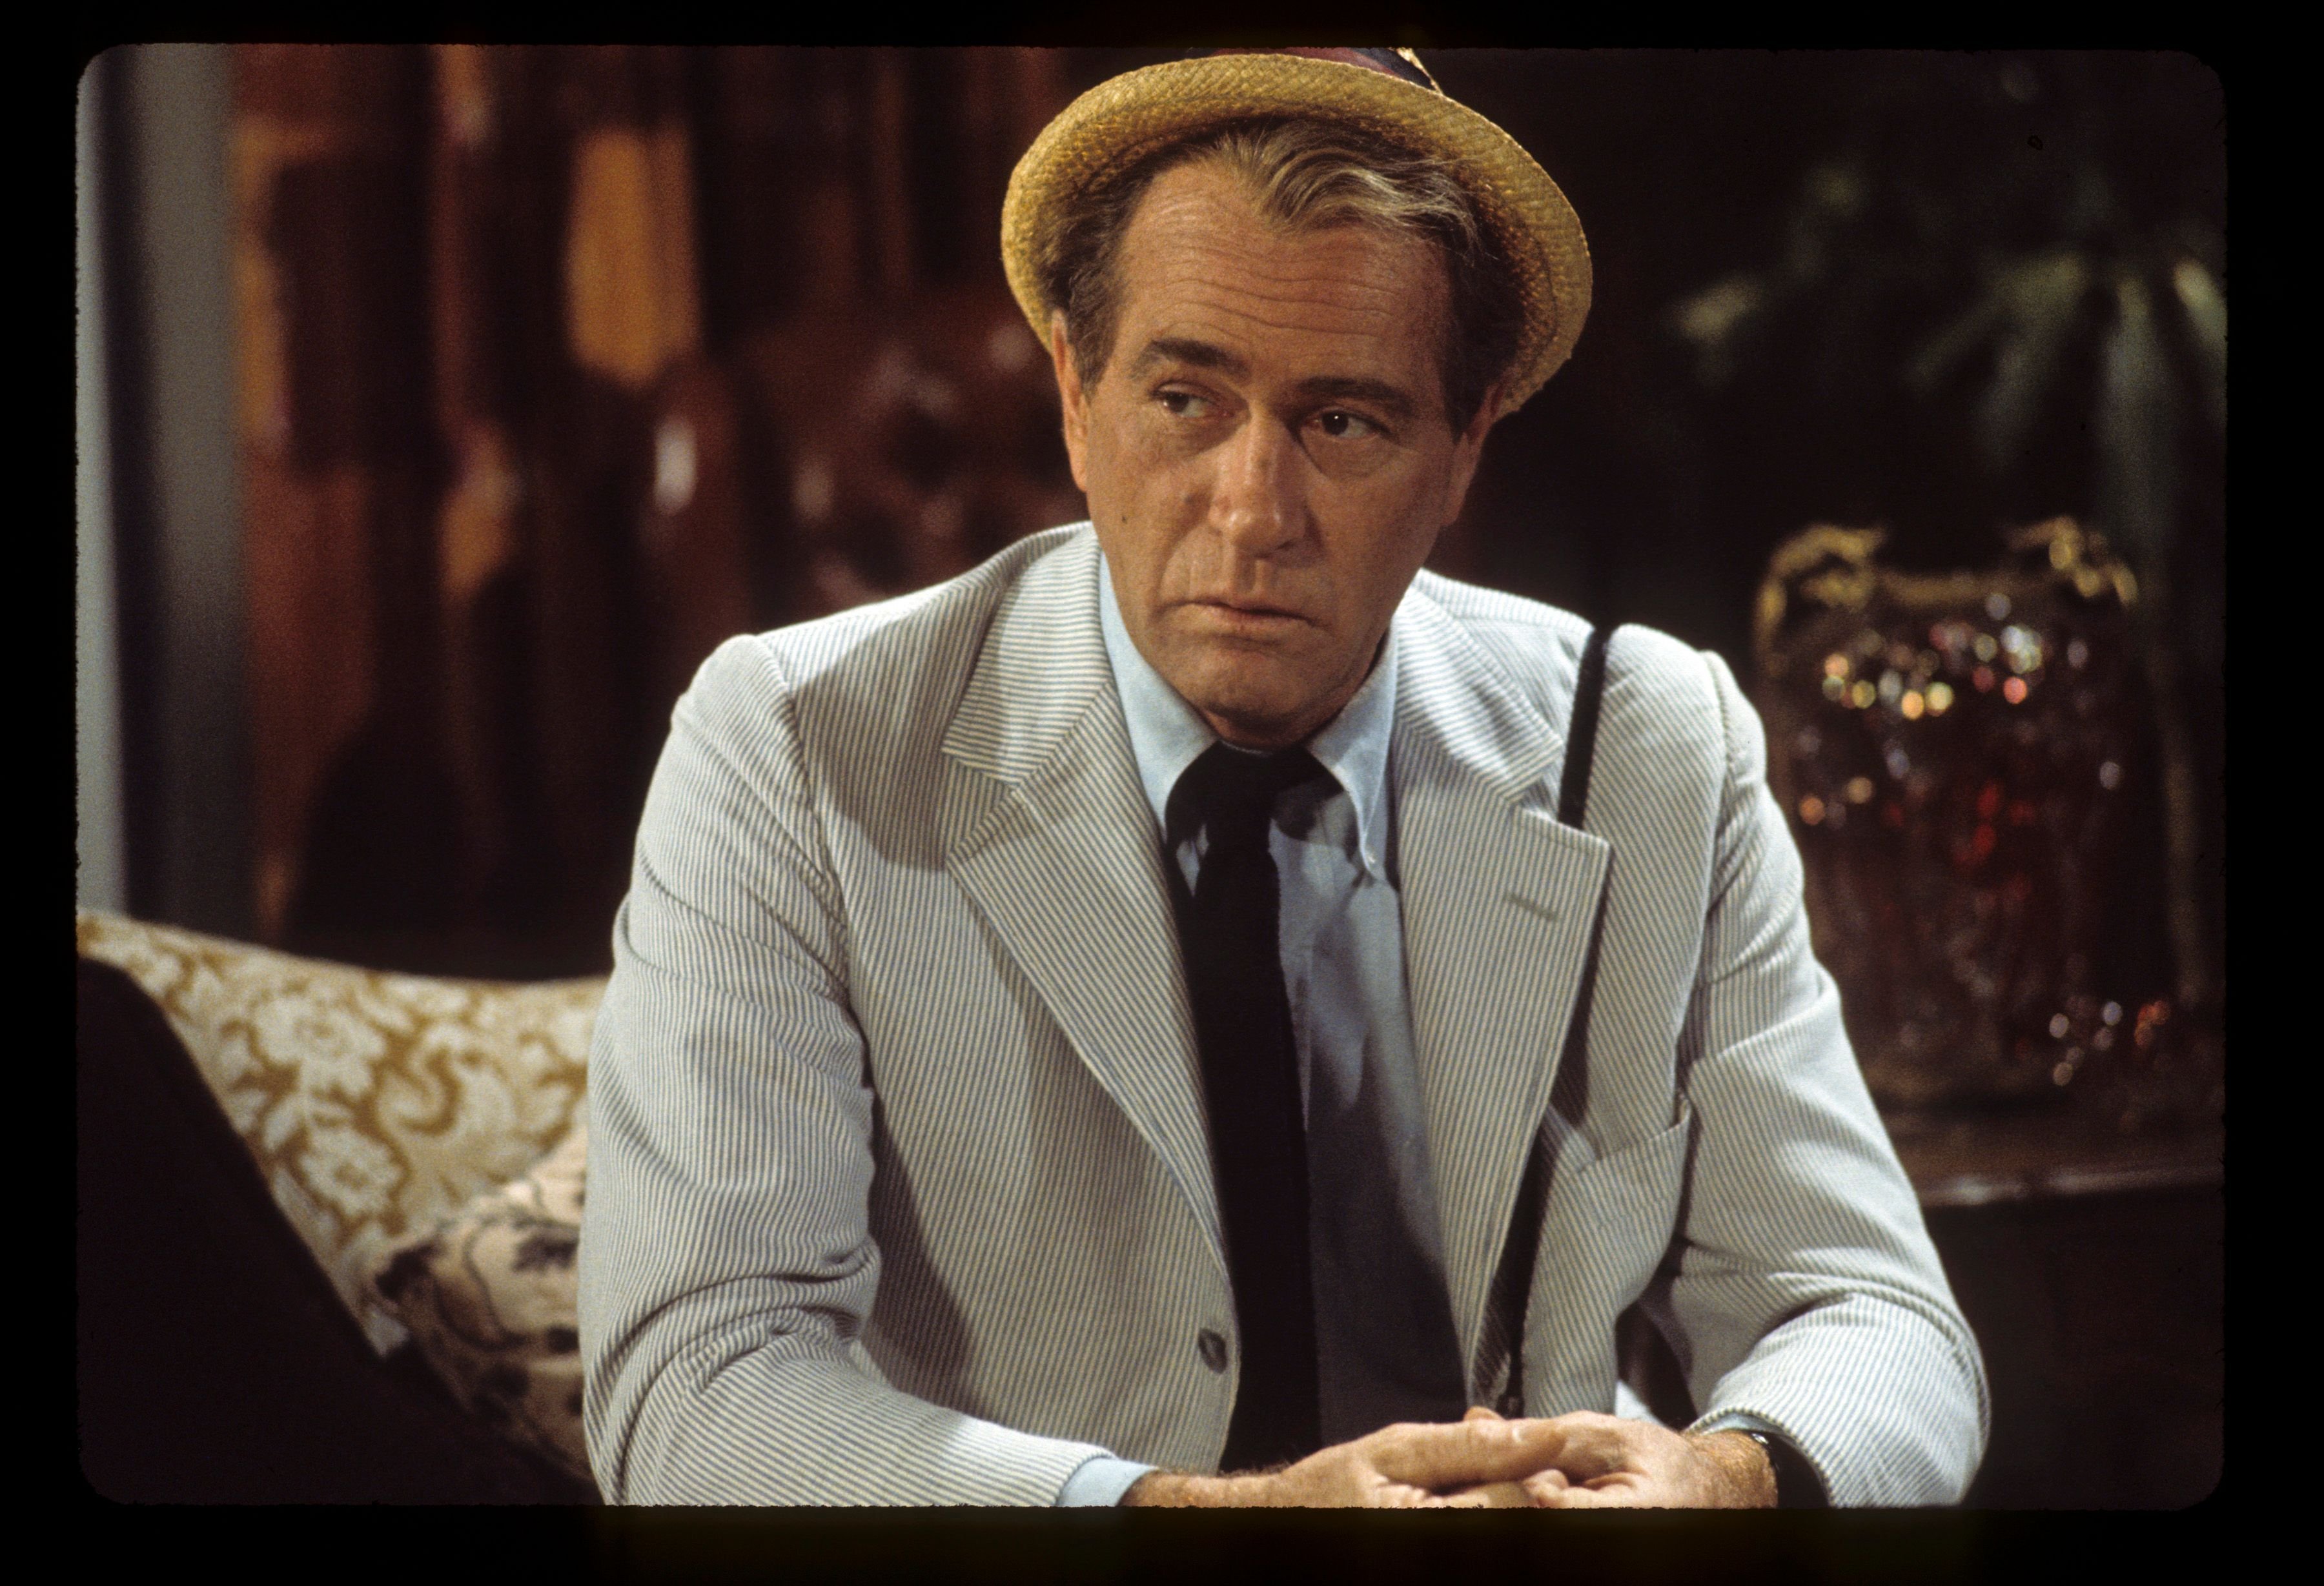 THE NIGHT STALKER (A.K.A. KOLCHAK: THE NIGHT STALKER) - "Mr. R.I.N.G." - Airdate: January 10, 1975. | Getty Images